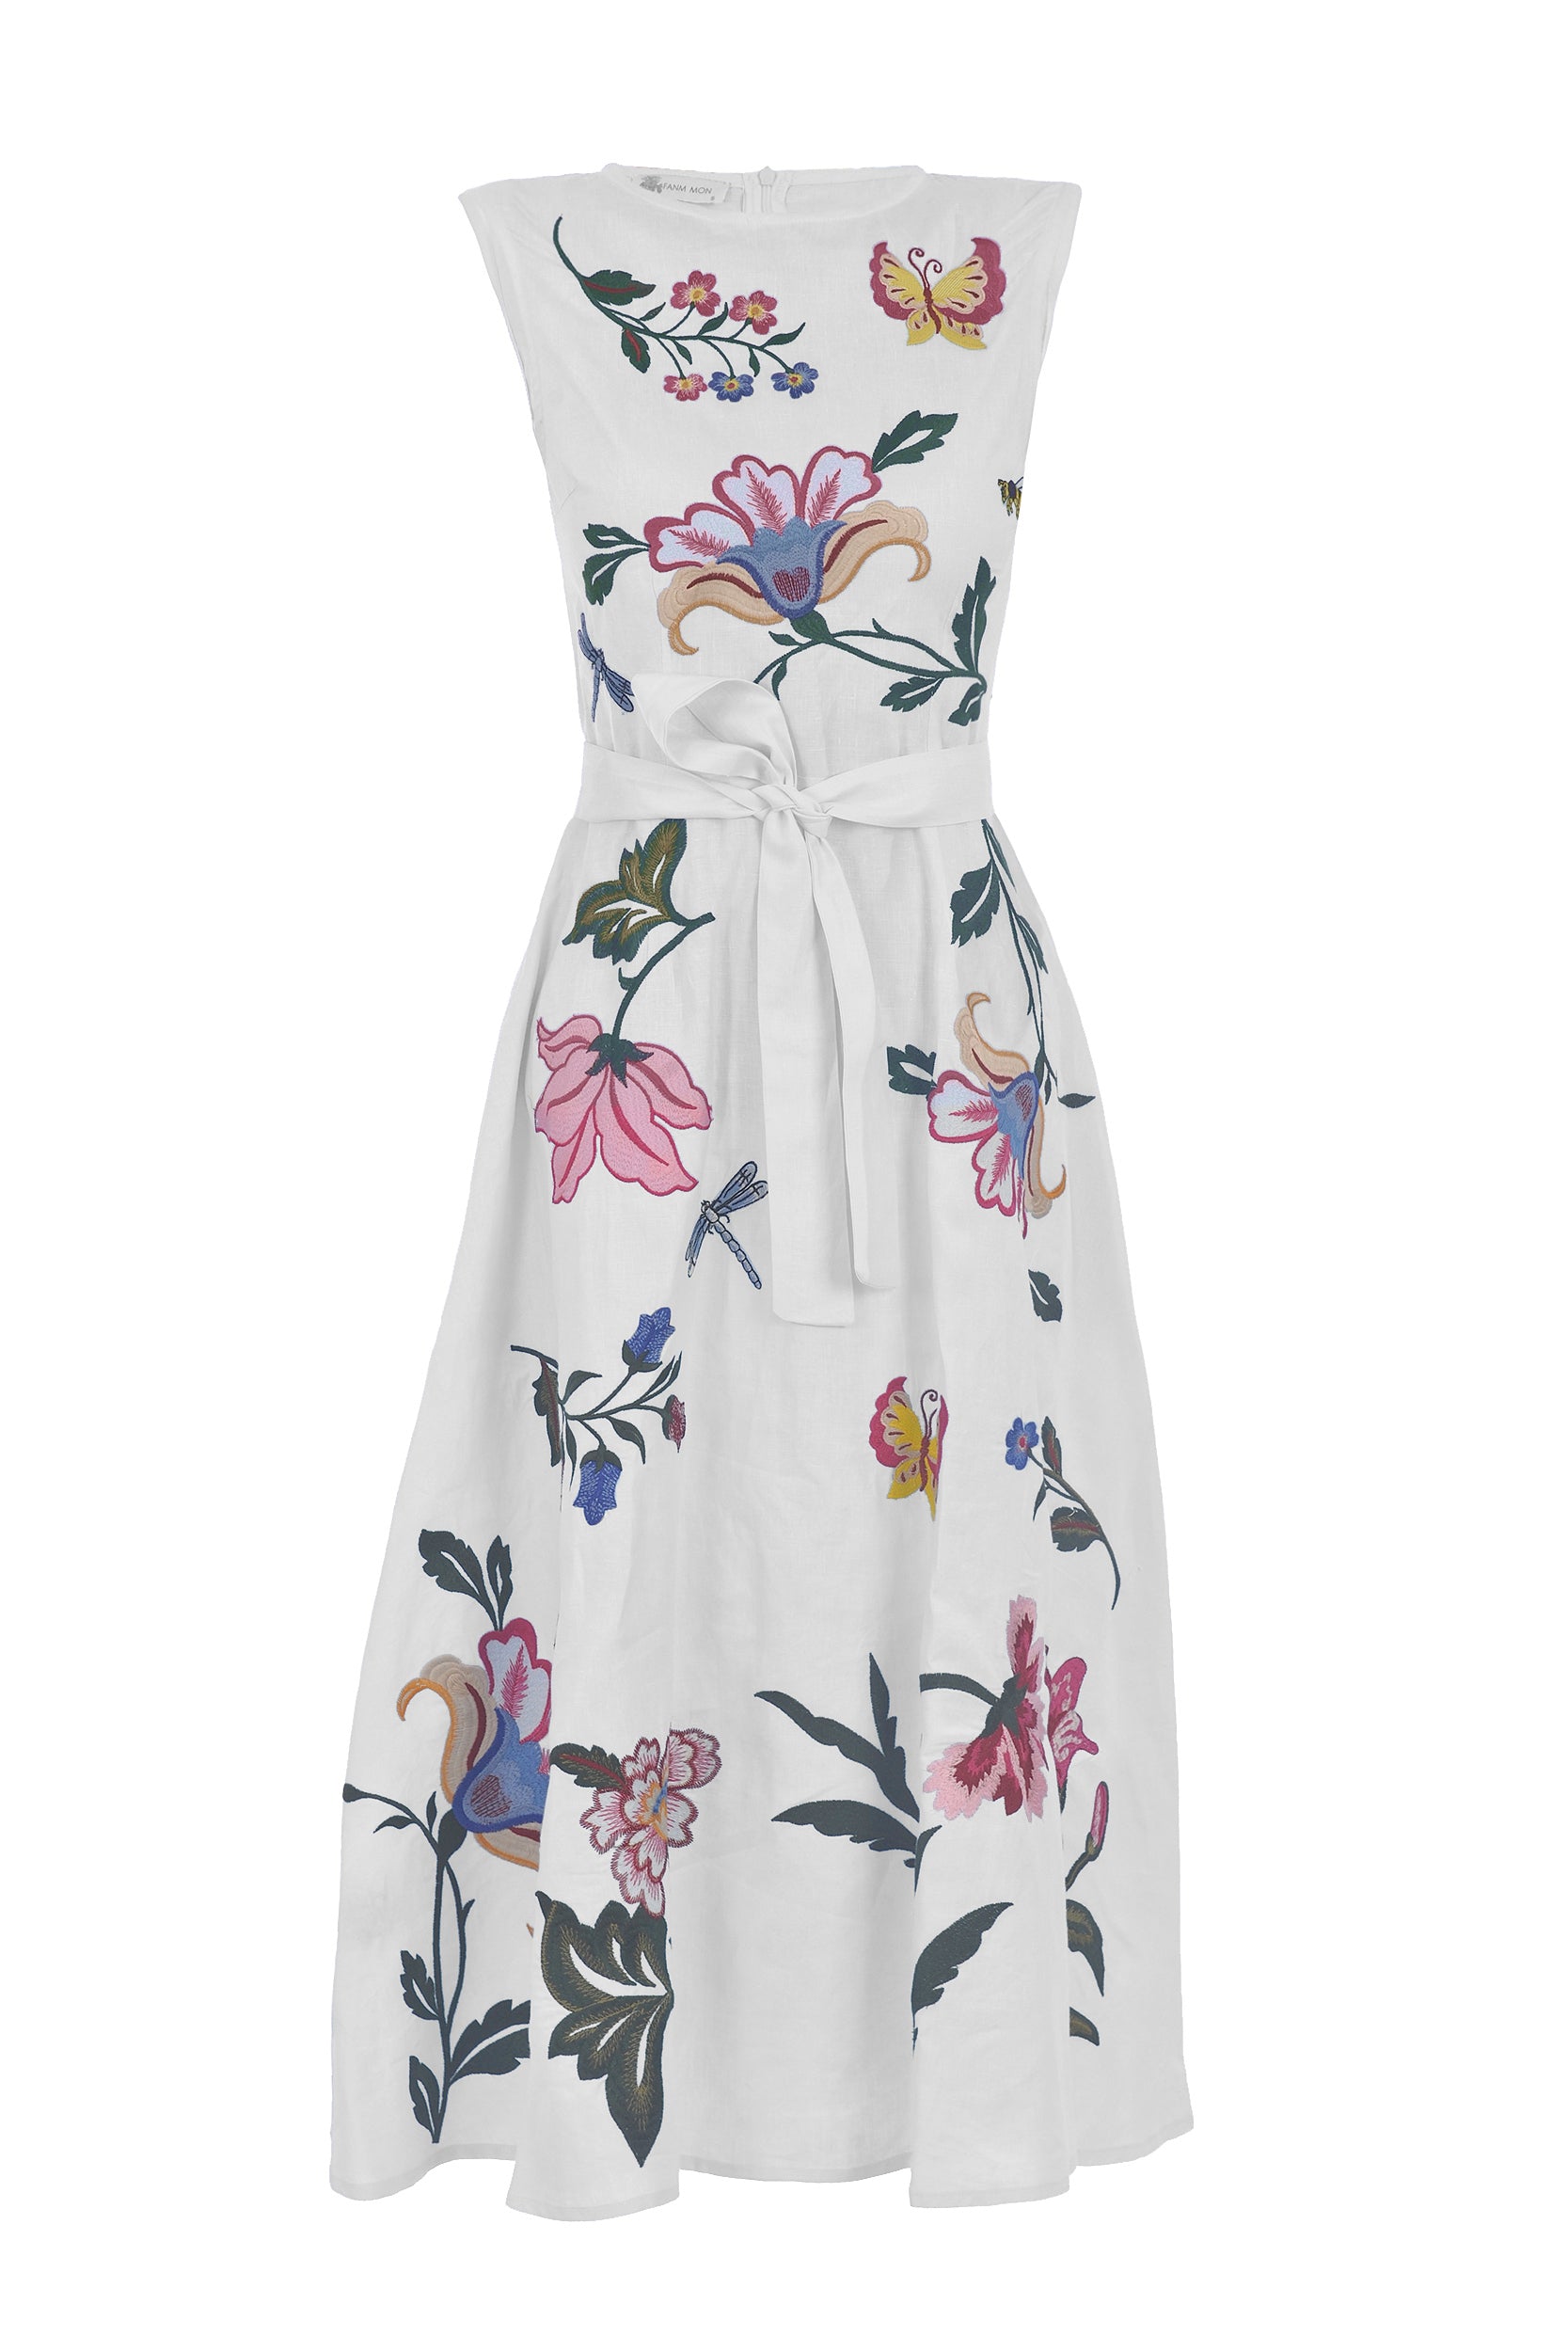 Monnalisa floral-embroidered detail dress - White